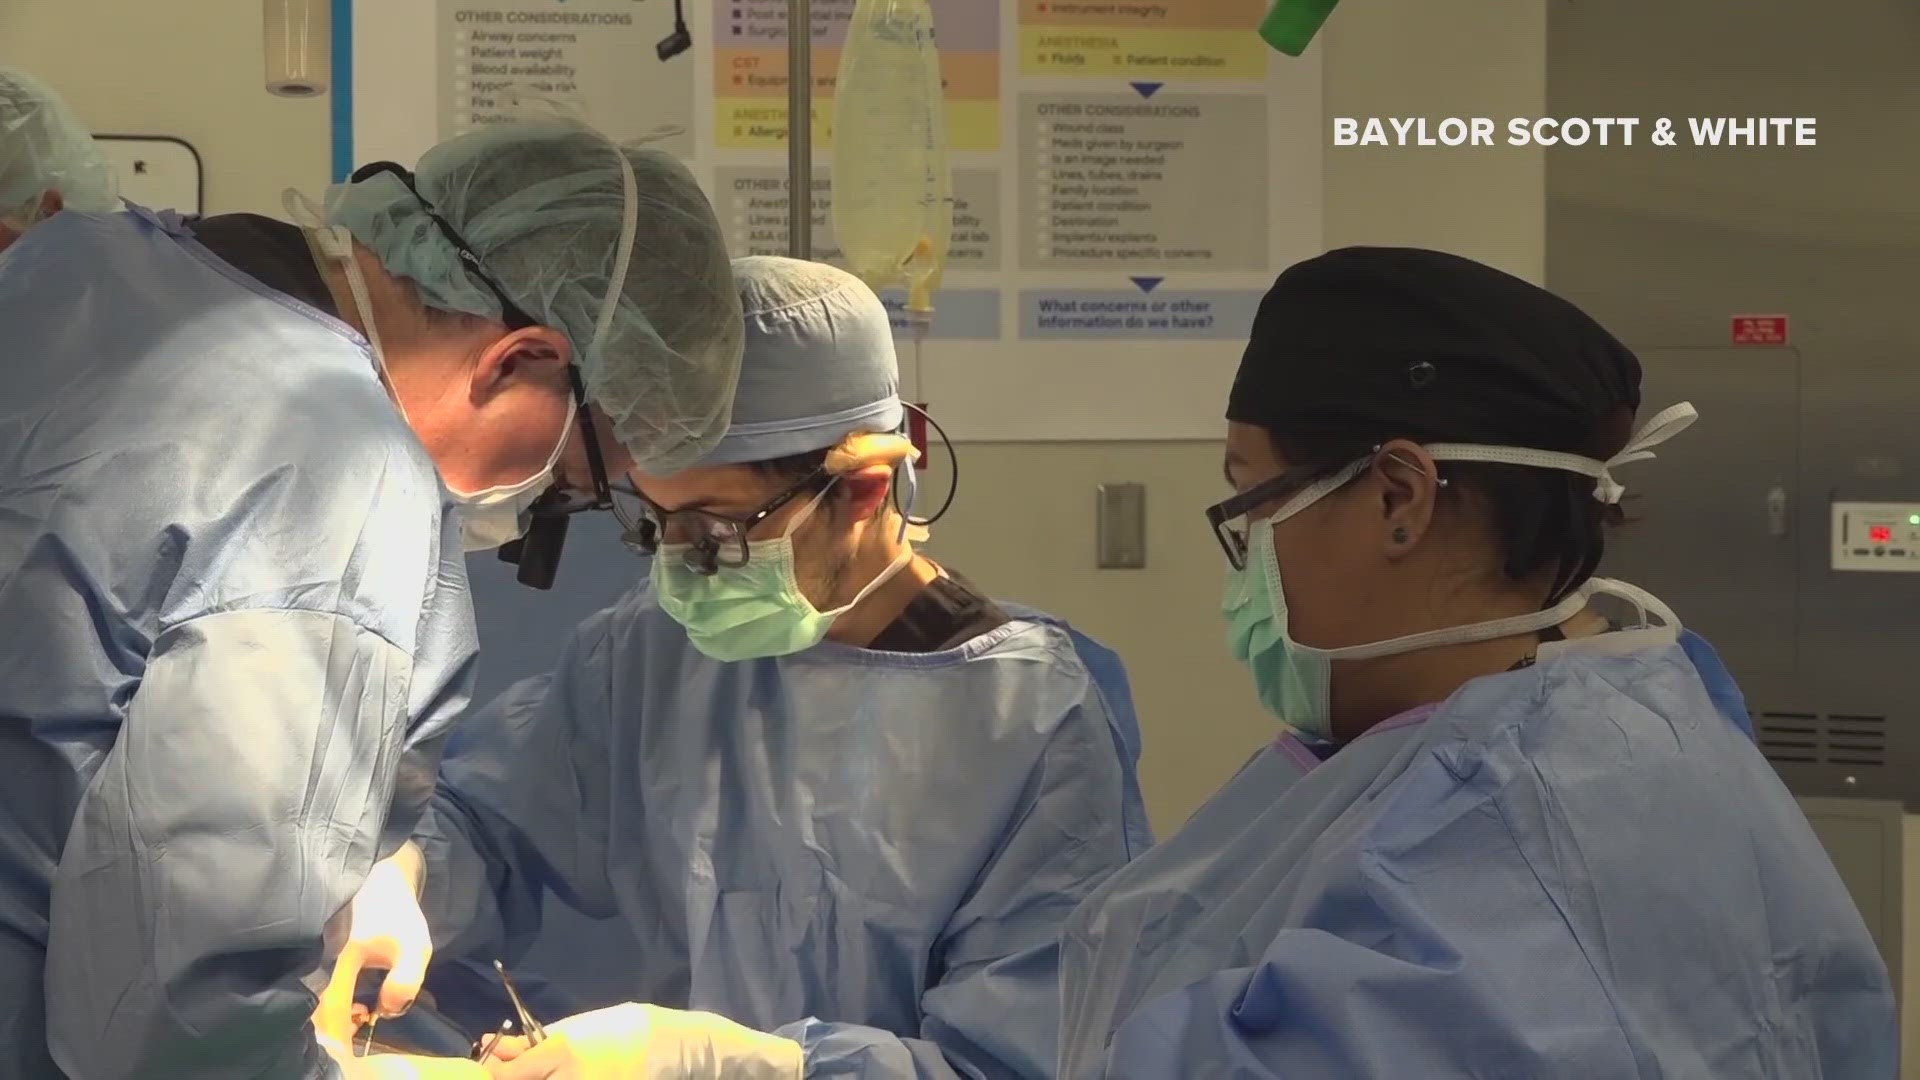 A three-way kidney transplant is showing that finding matches can be easier and faster.